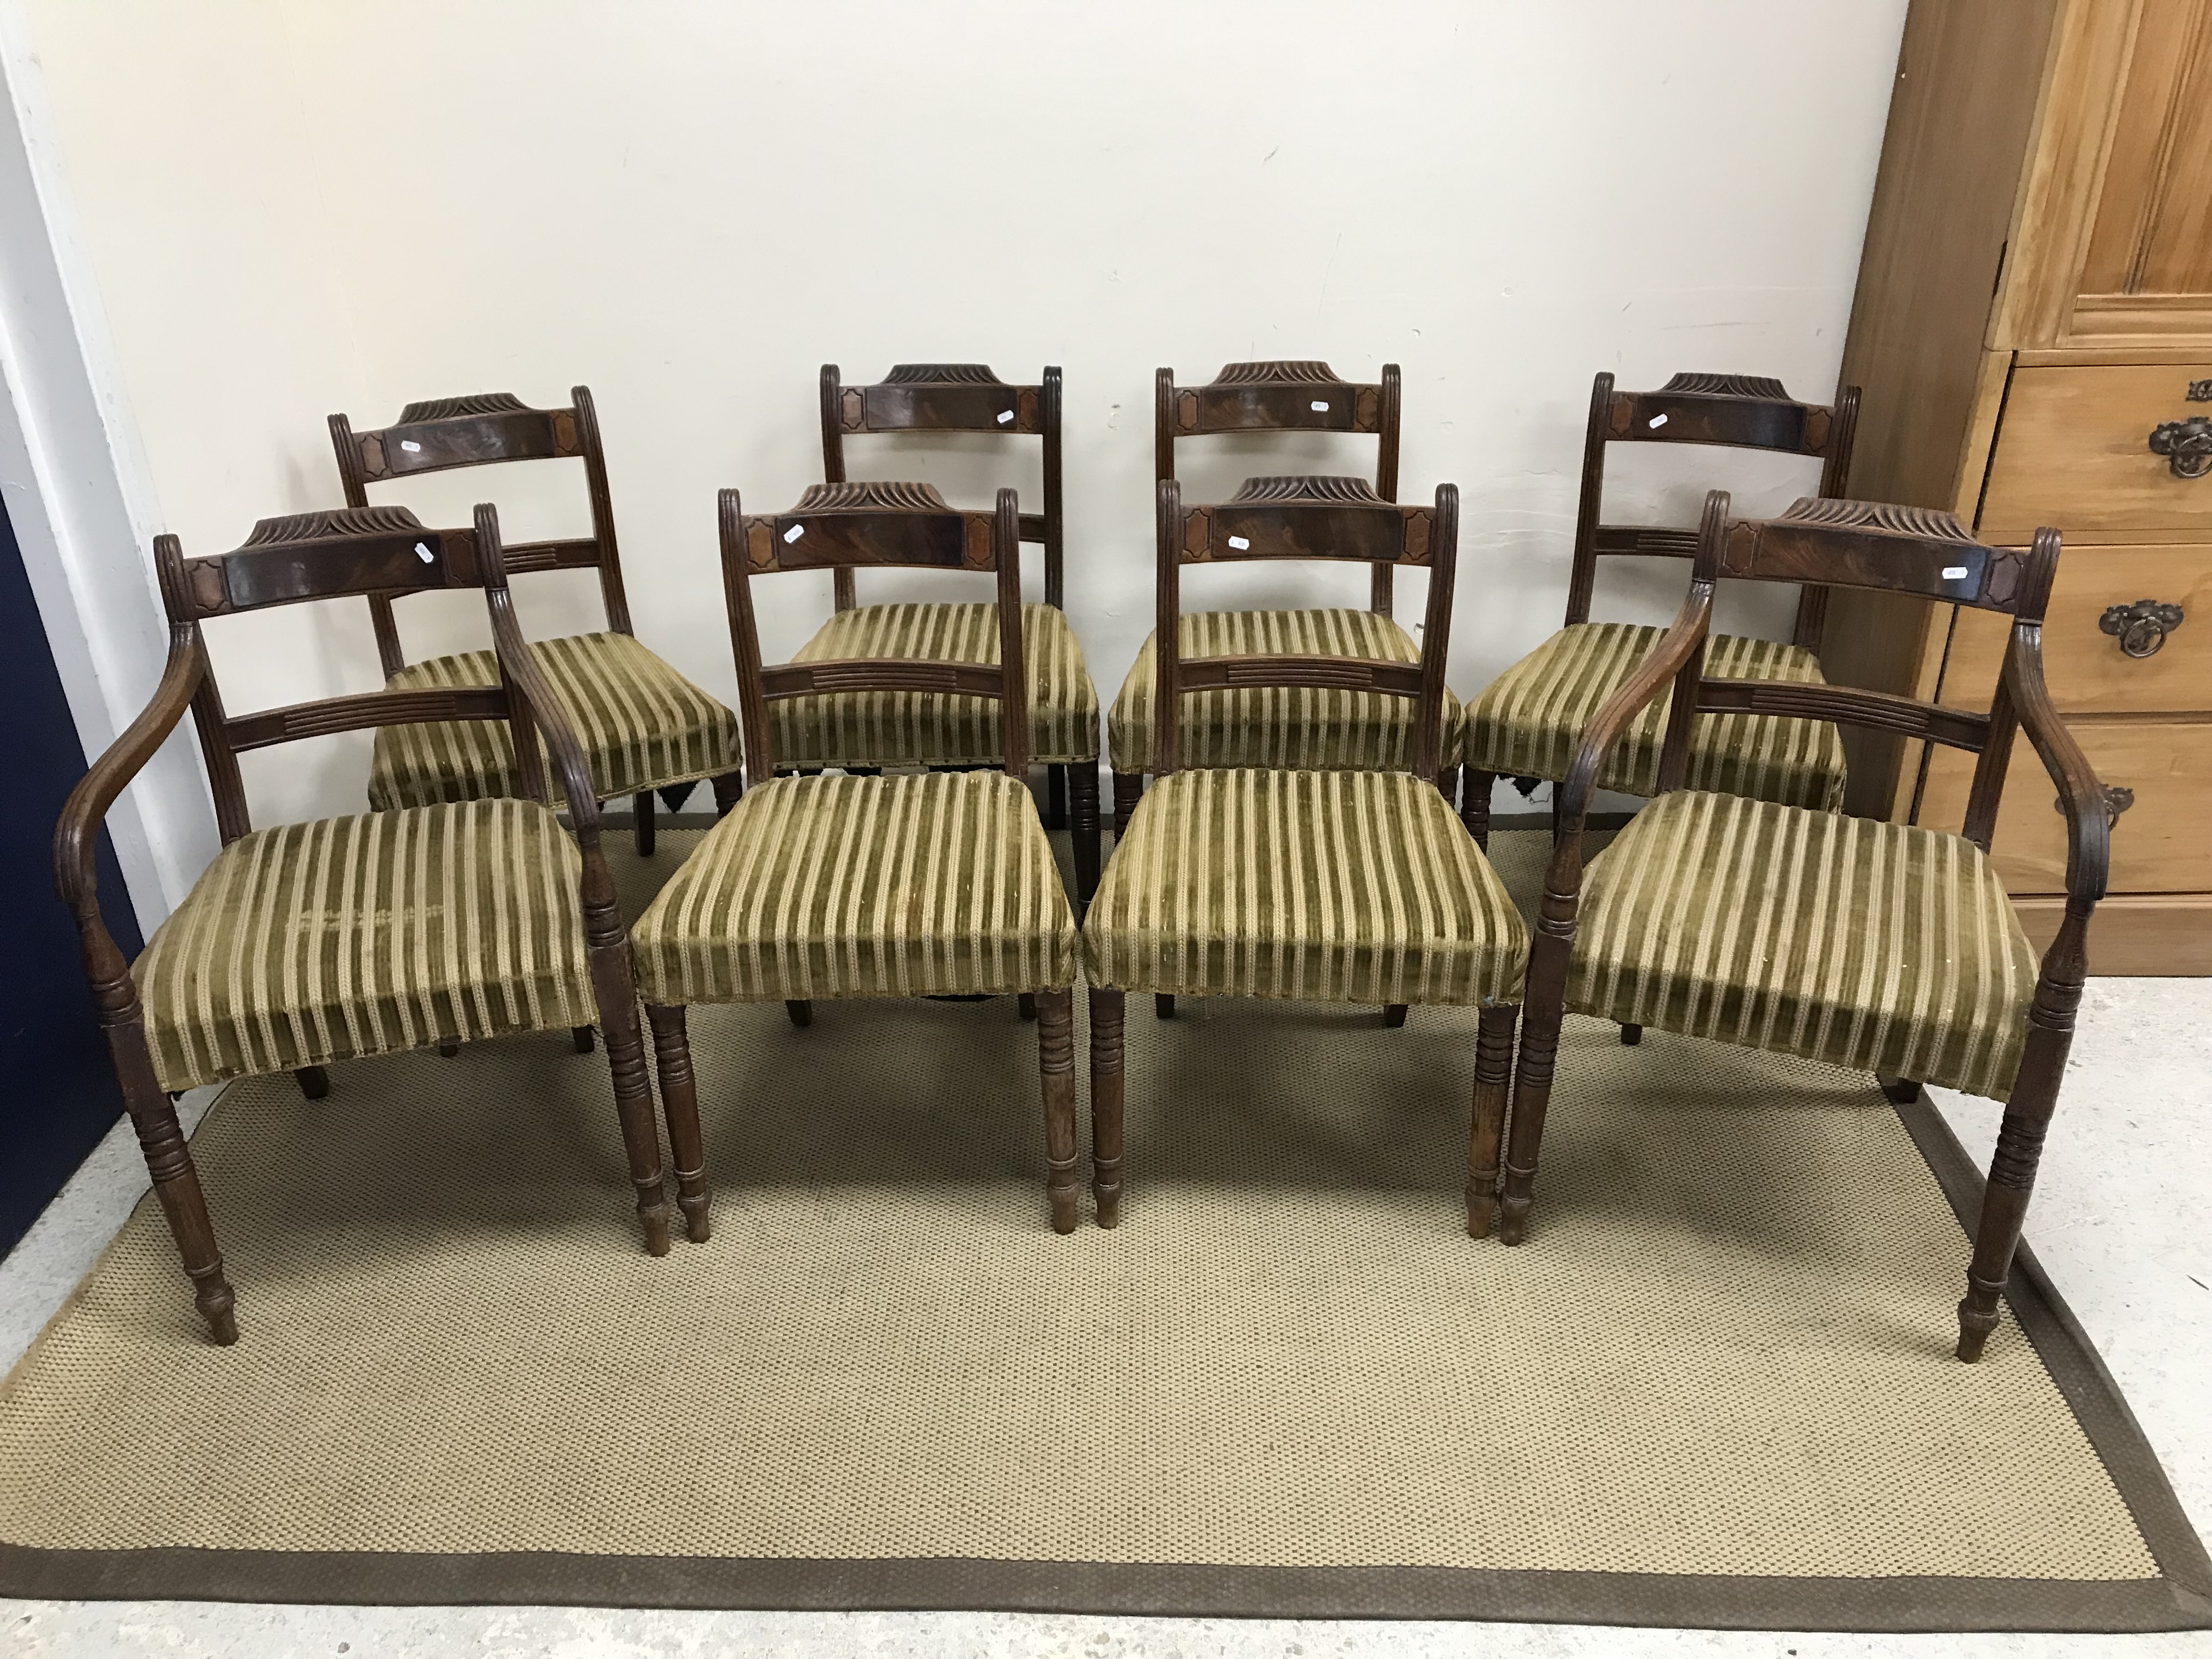 A set of eight 19th Century mahogany bar back dining chairs with upholstered seats on turned and